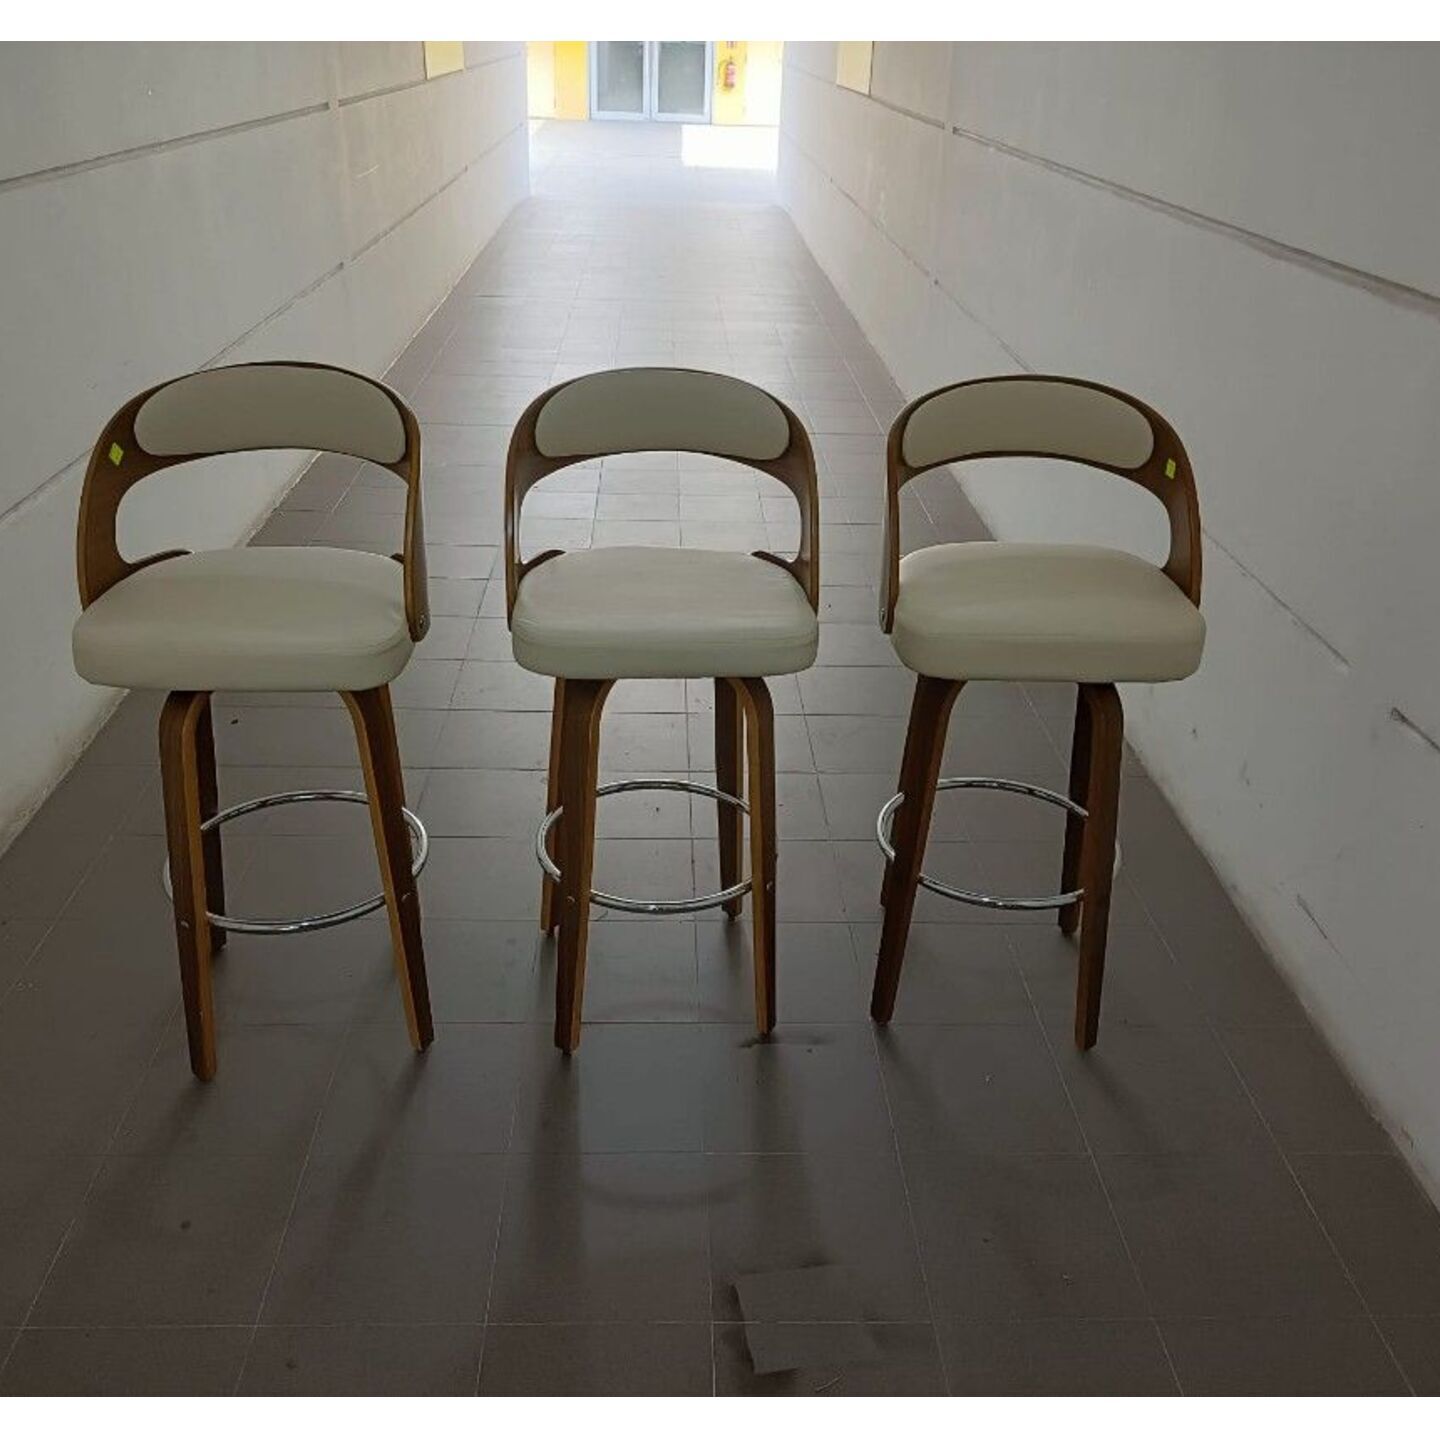 3 x FRANKLIN Swivel Bar Chairs in Off White